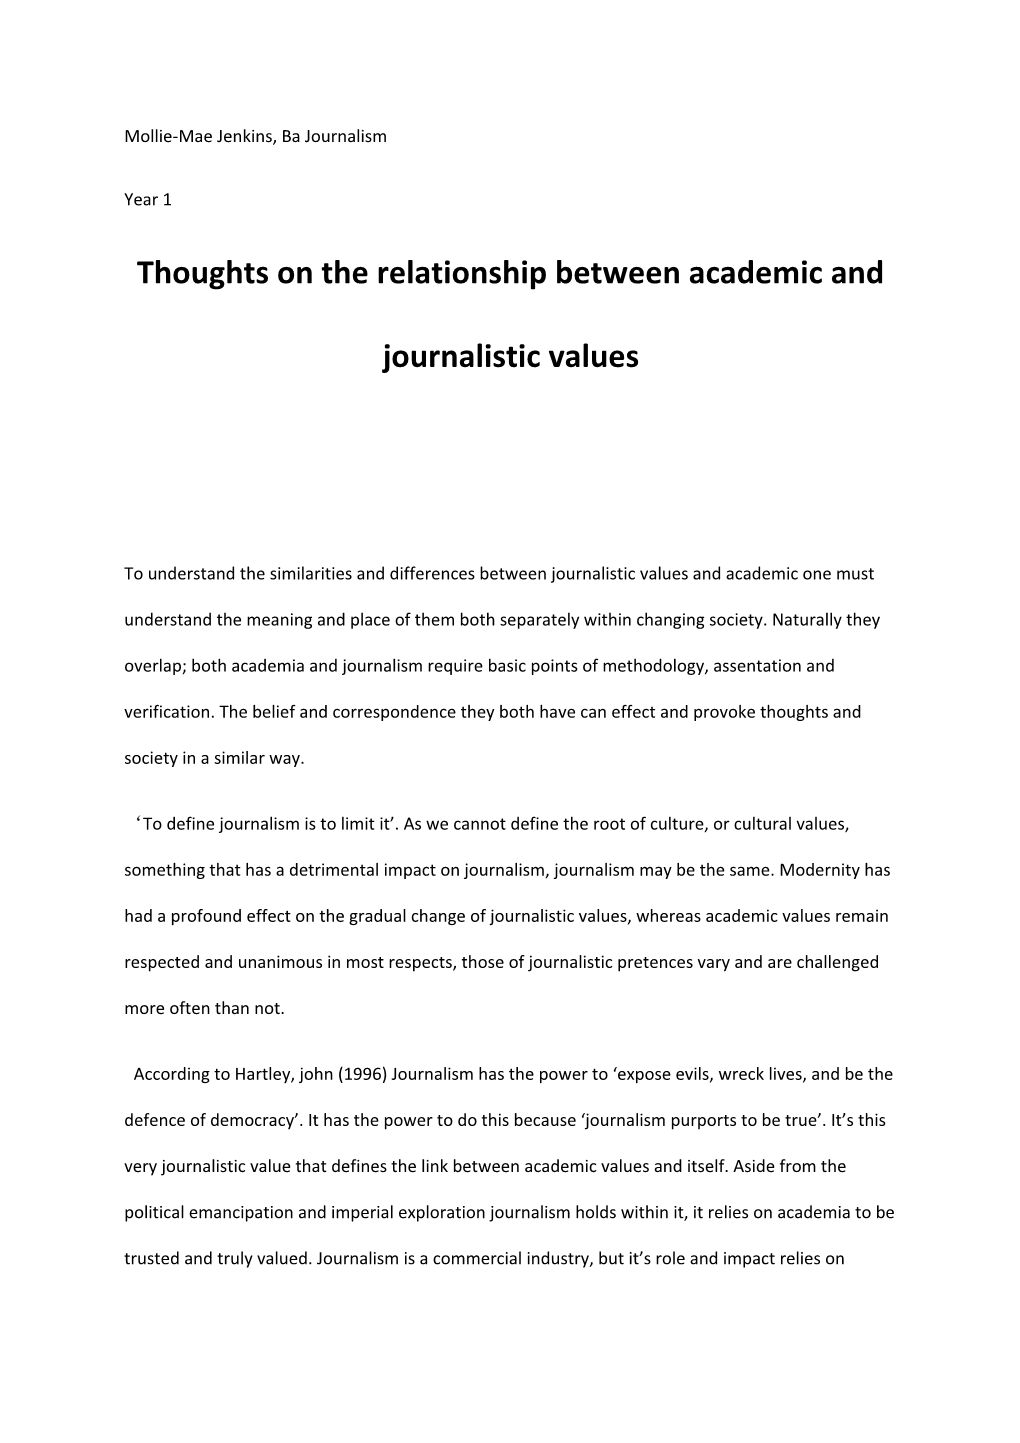 Thoughts on the Relationship Between Academic and Journalistic Values